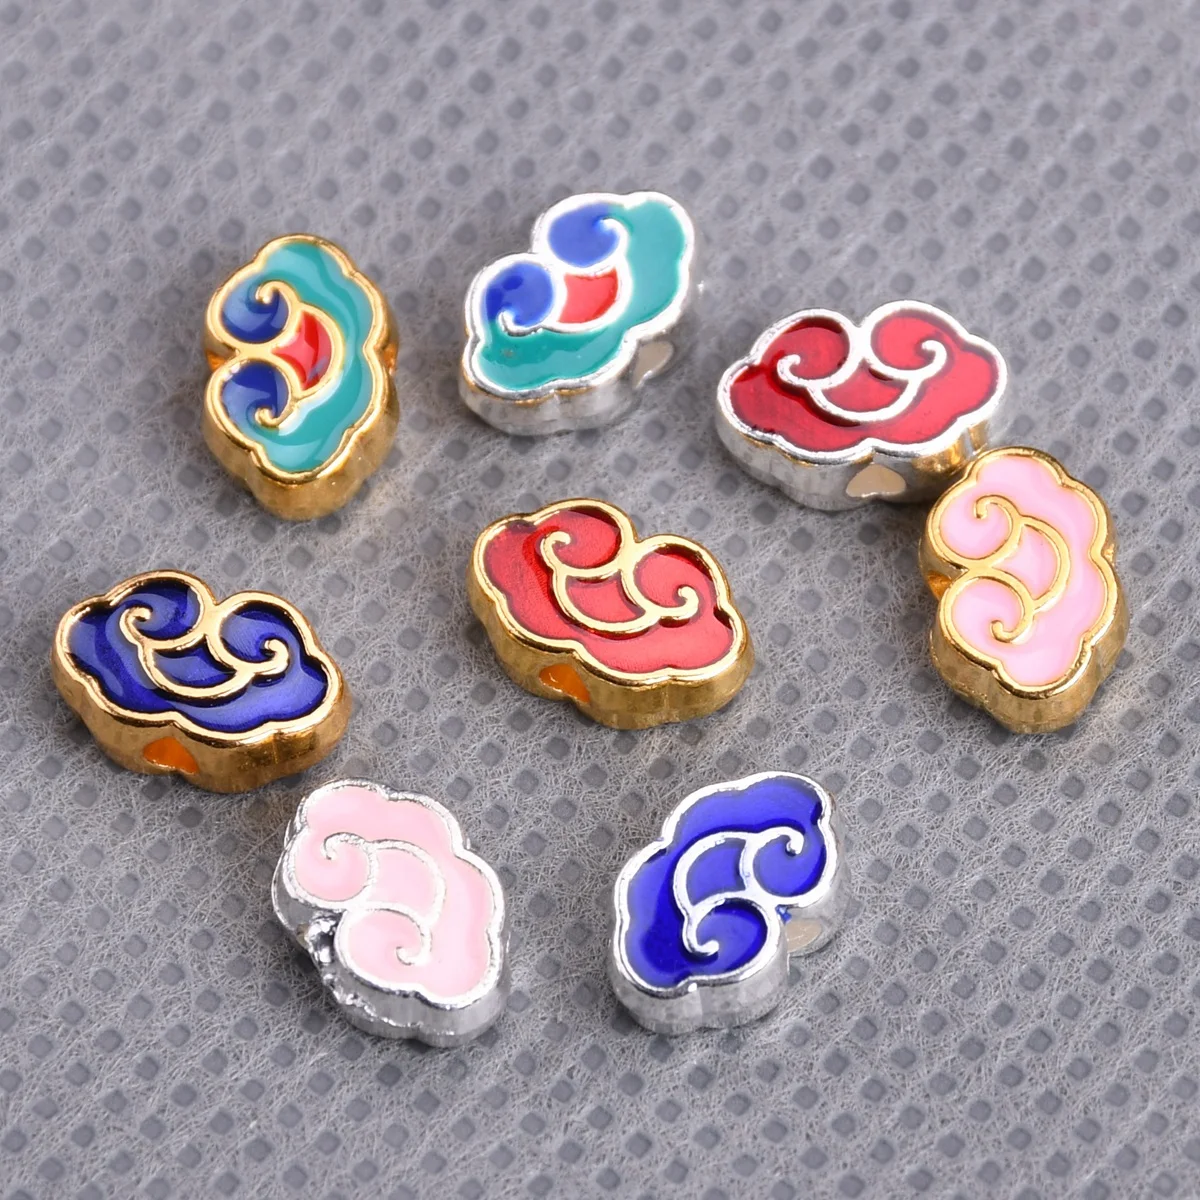 10pcs Enamel Metal 9.5x6.2mm Chinese Propitious Cloud Shape Loose Craft Beads For Jewelry Making DIY Findings diy crystal silicone mold pendant key chain defense toy uv resin epoxy mold handmade craft jewelry making accessaries